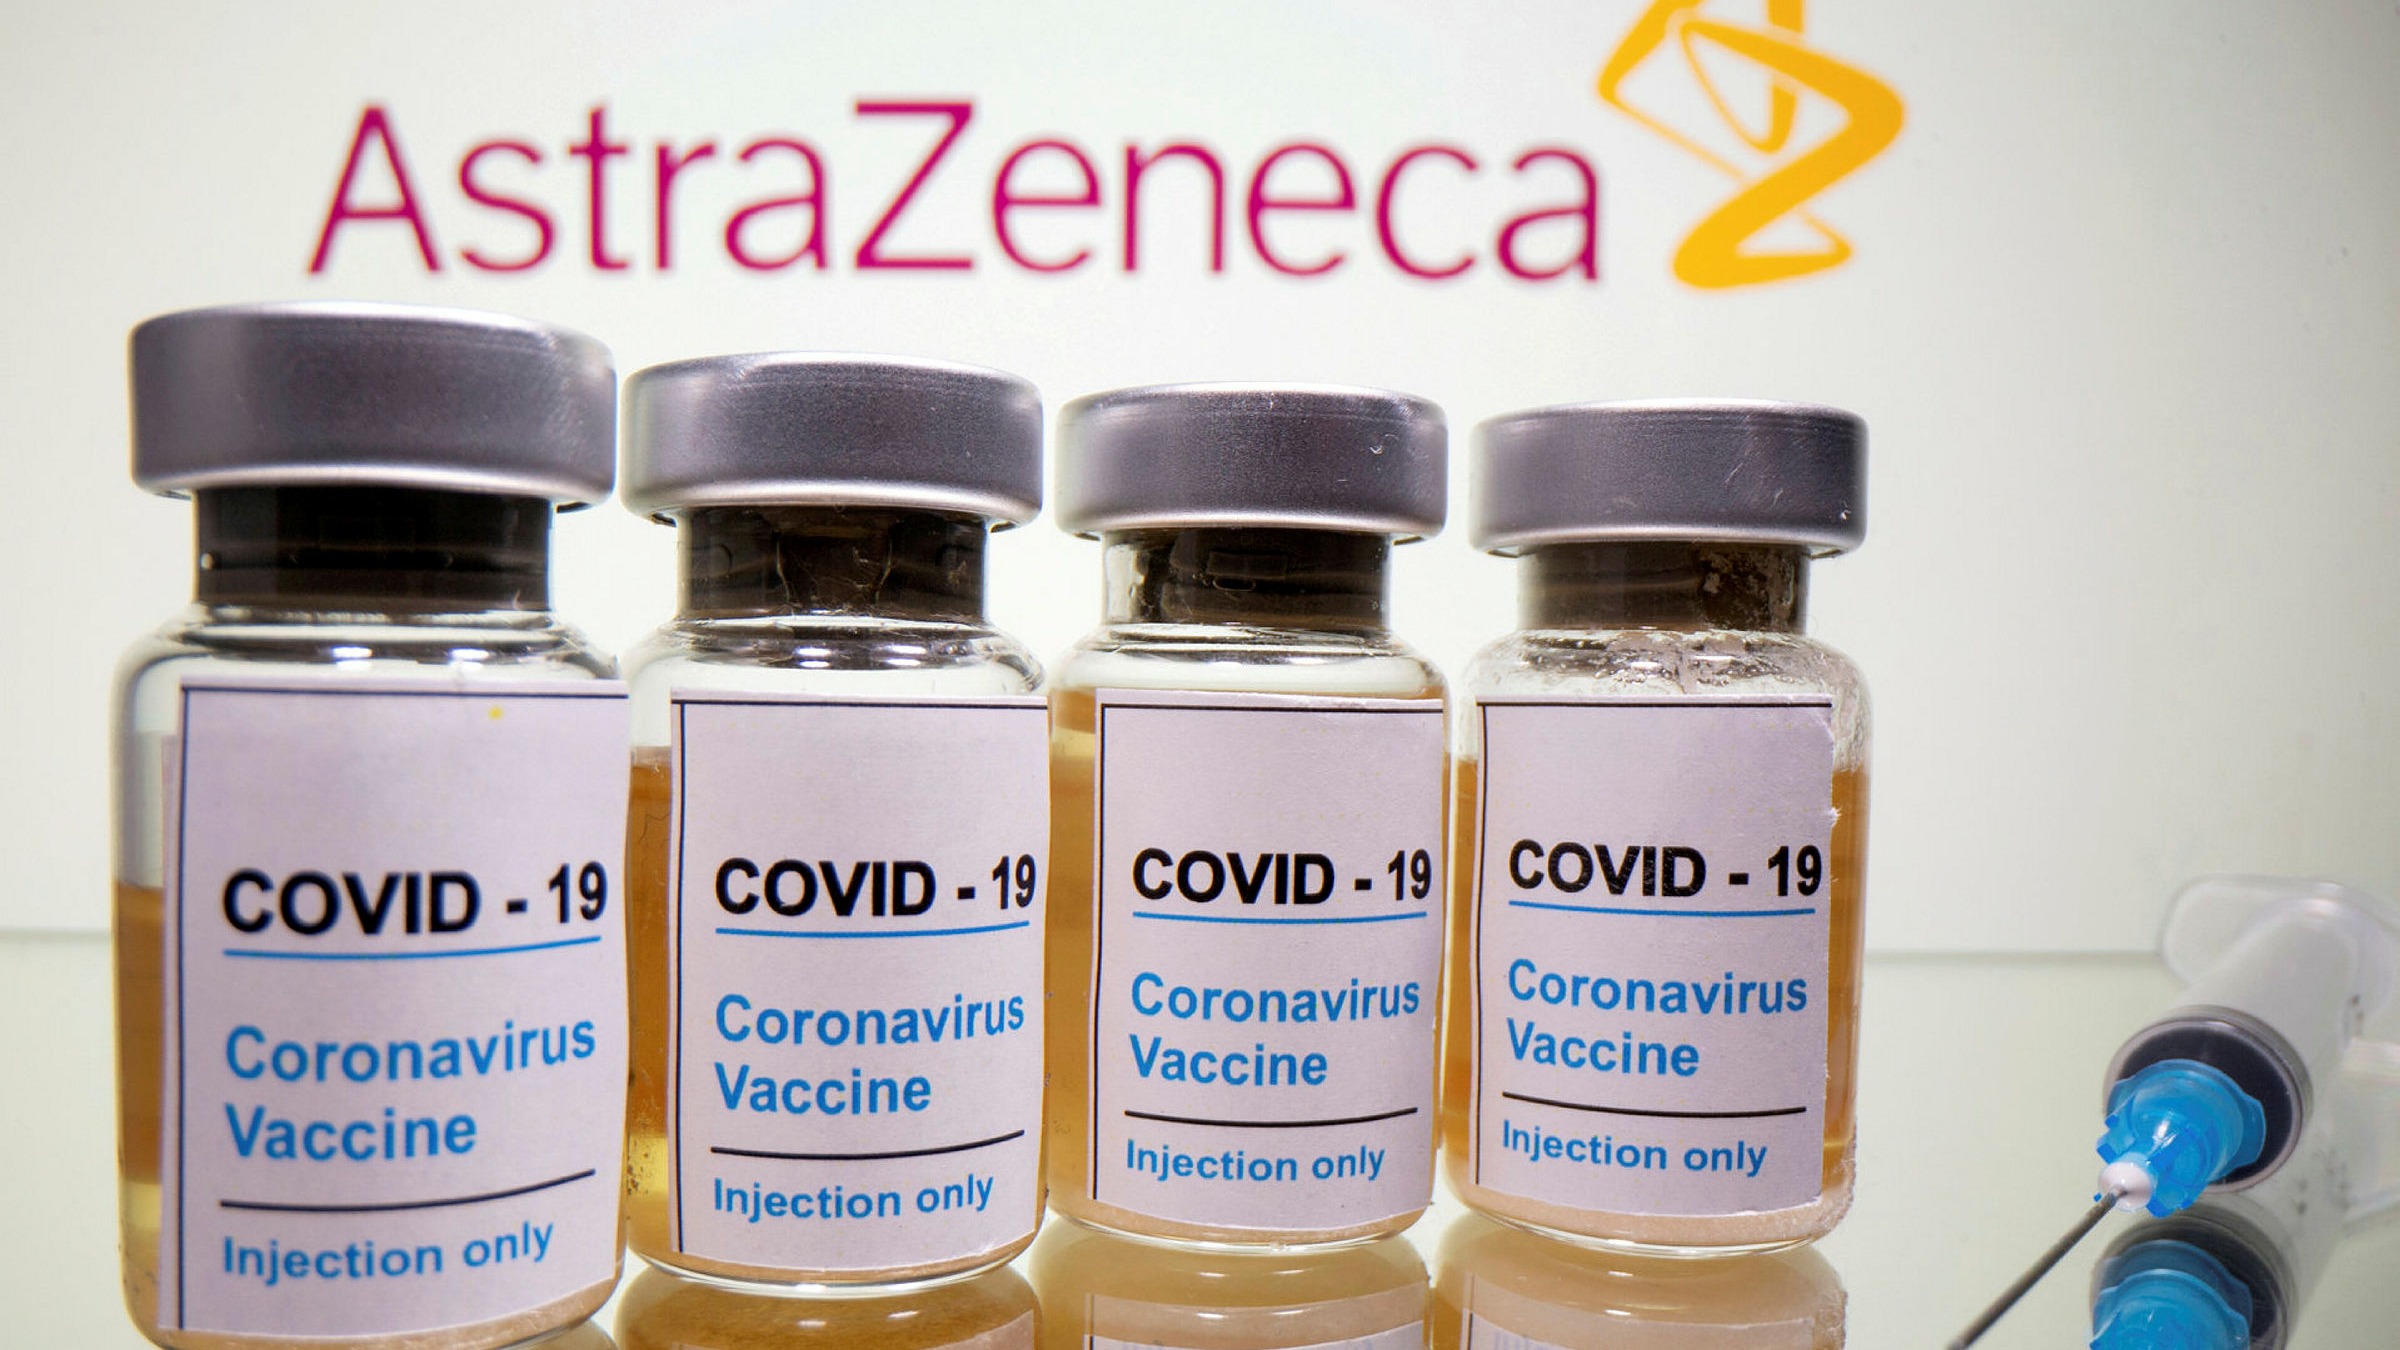 German panel advises against AstraZeneca vaccine for over-65s | Financial Times